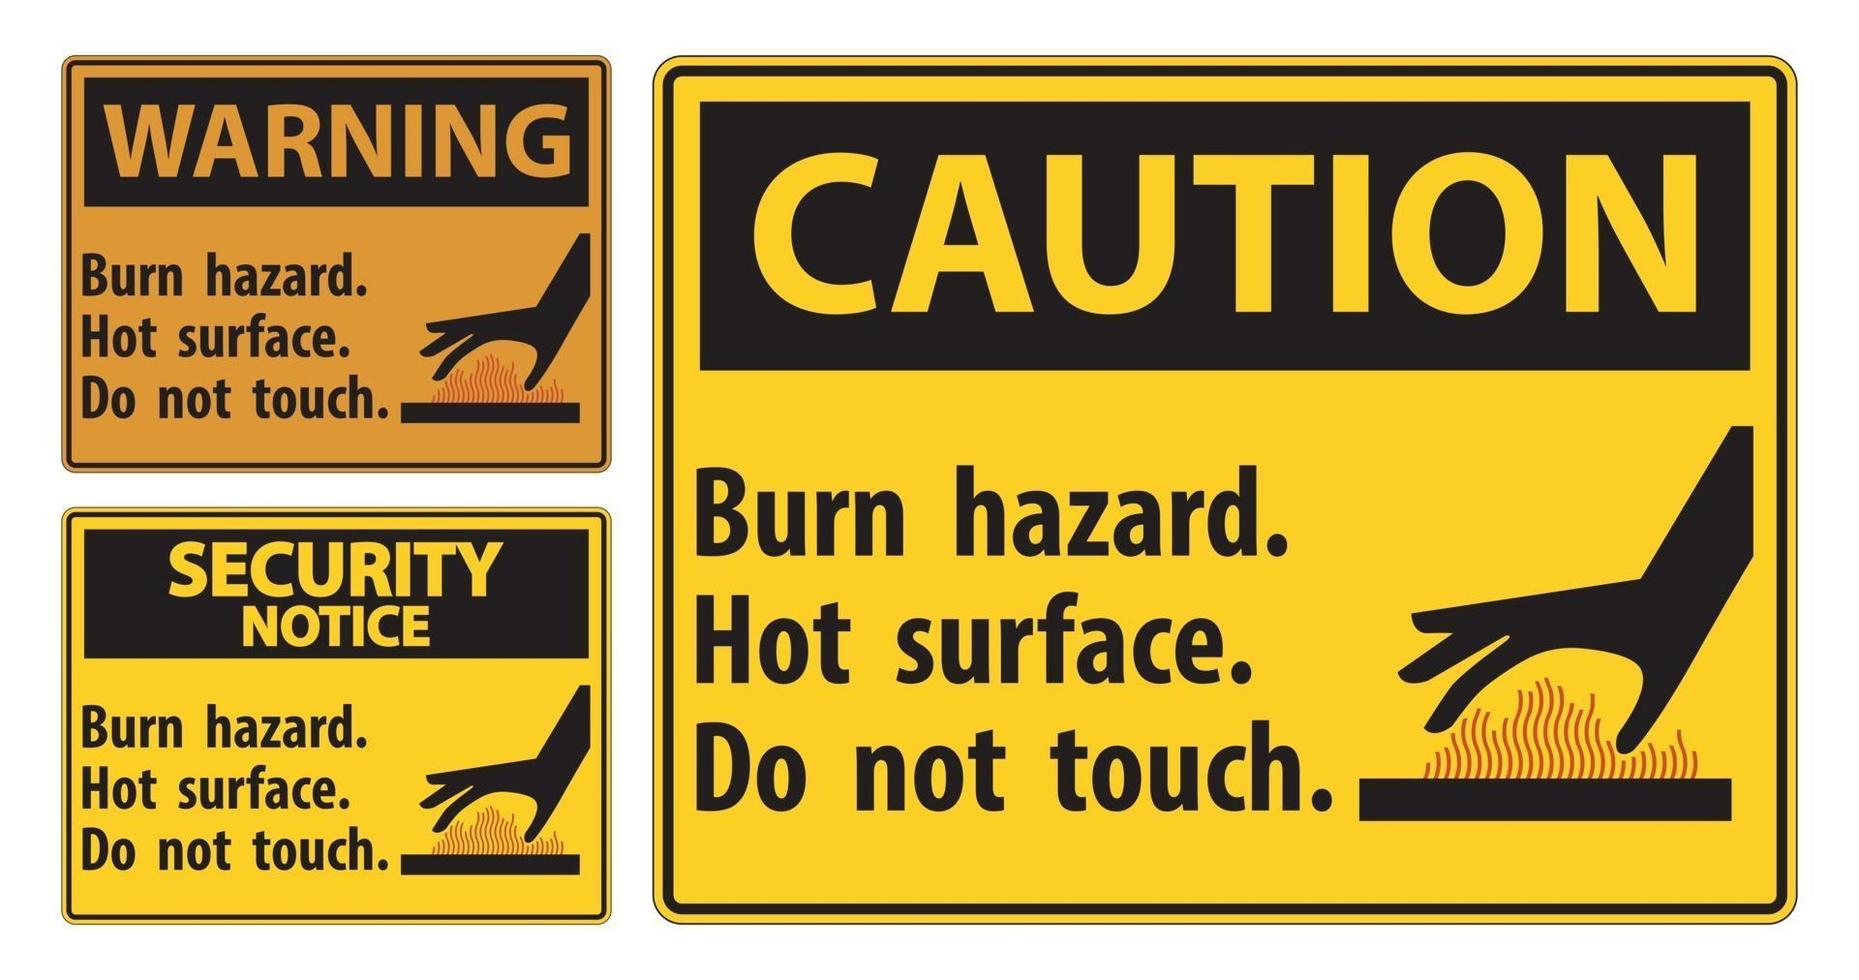 Burn hazard,Hot surface,Do not touch Symbol Sign Isolate on White Background,Vector Illustration vector